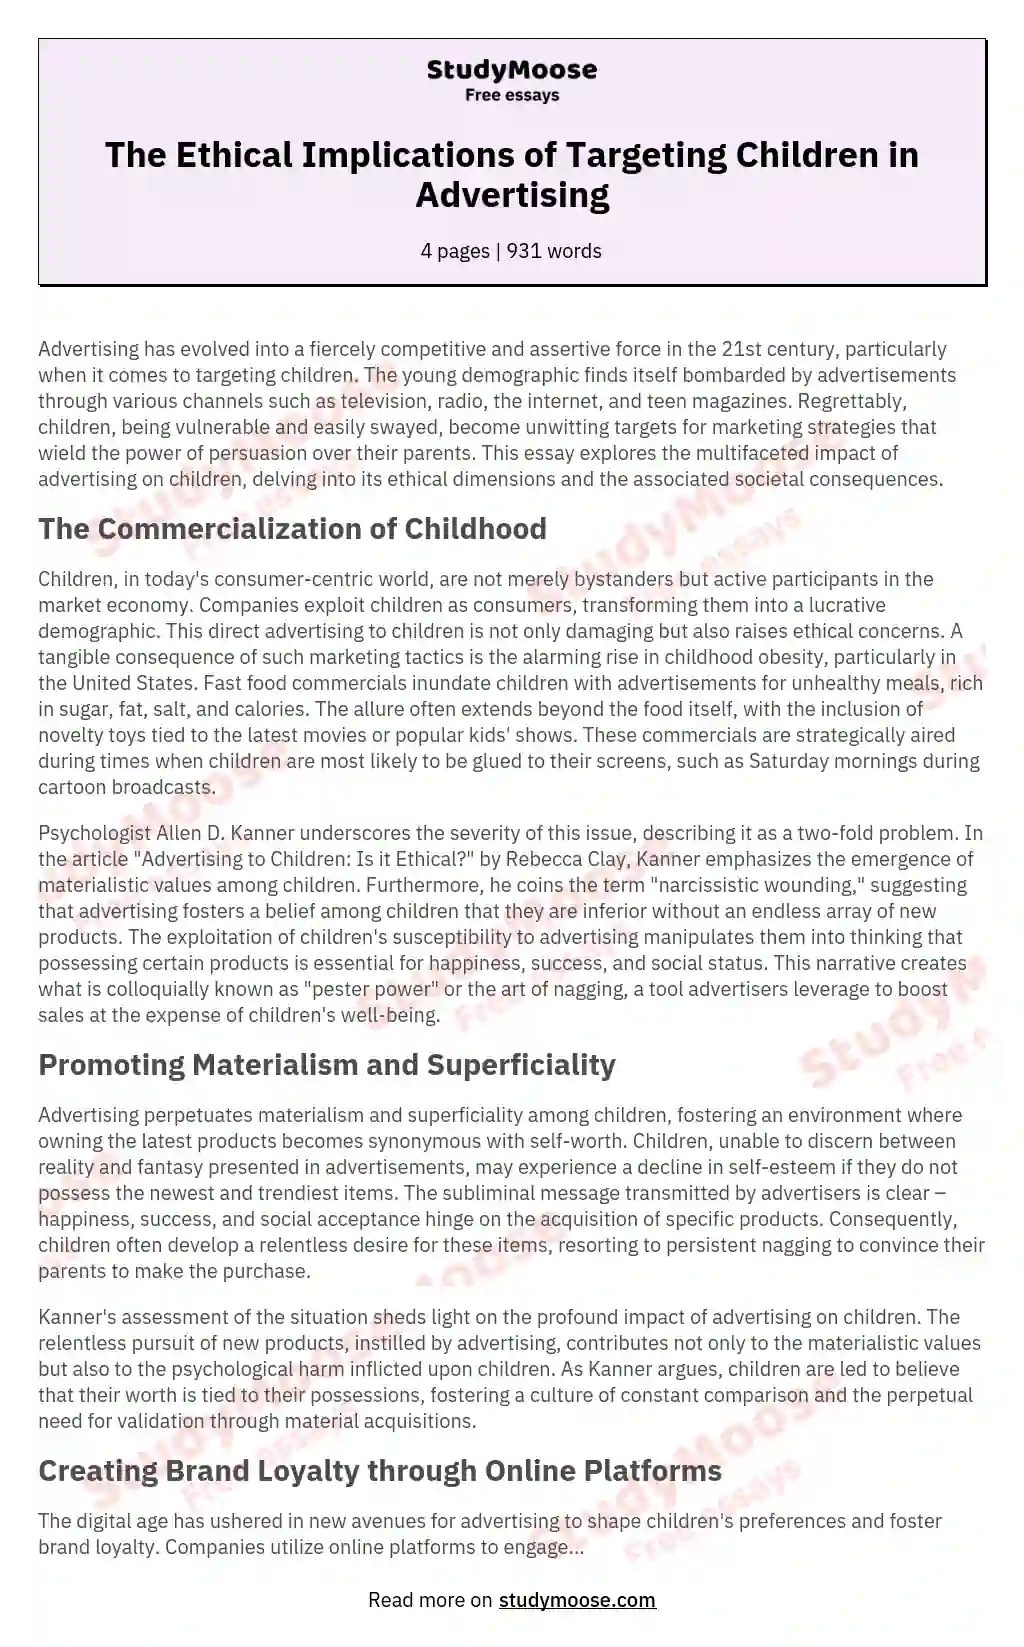 The Ethical Implications of Targeting Children in Advertising essay